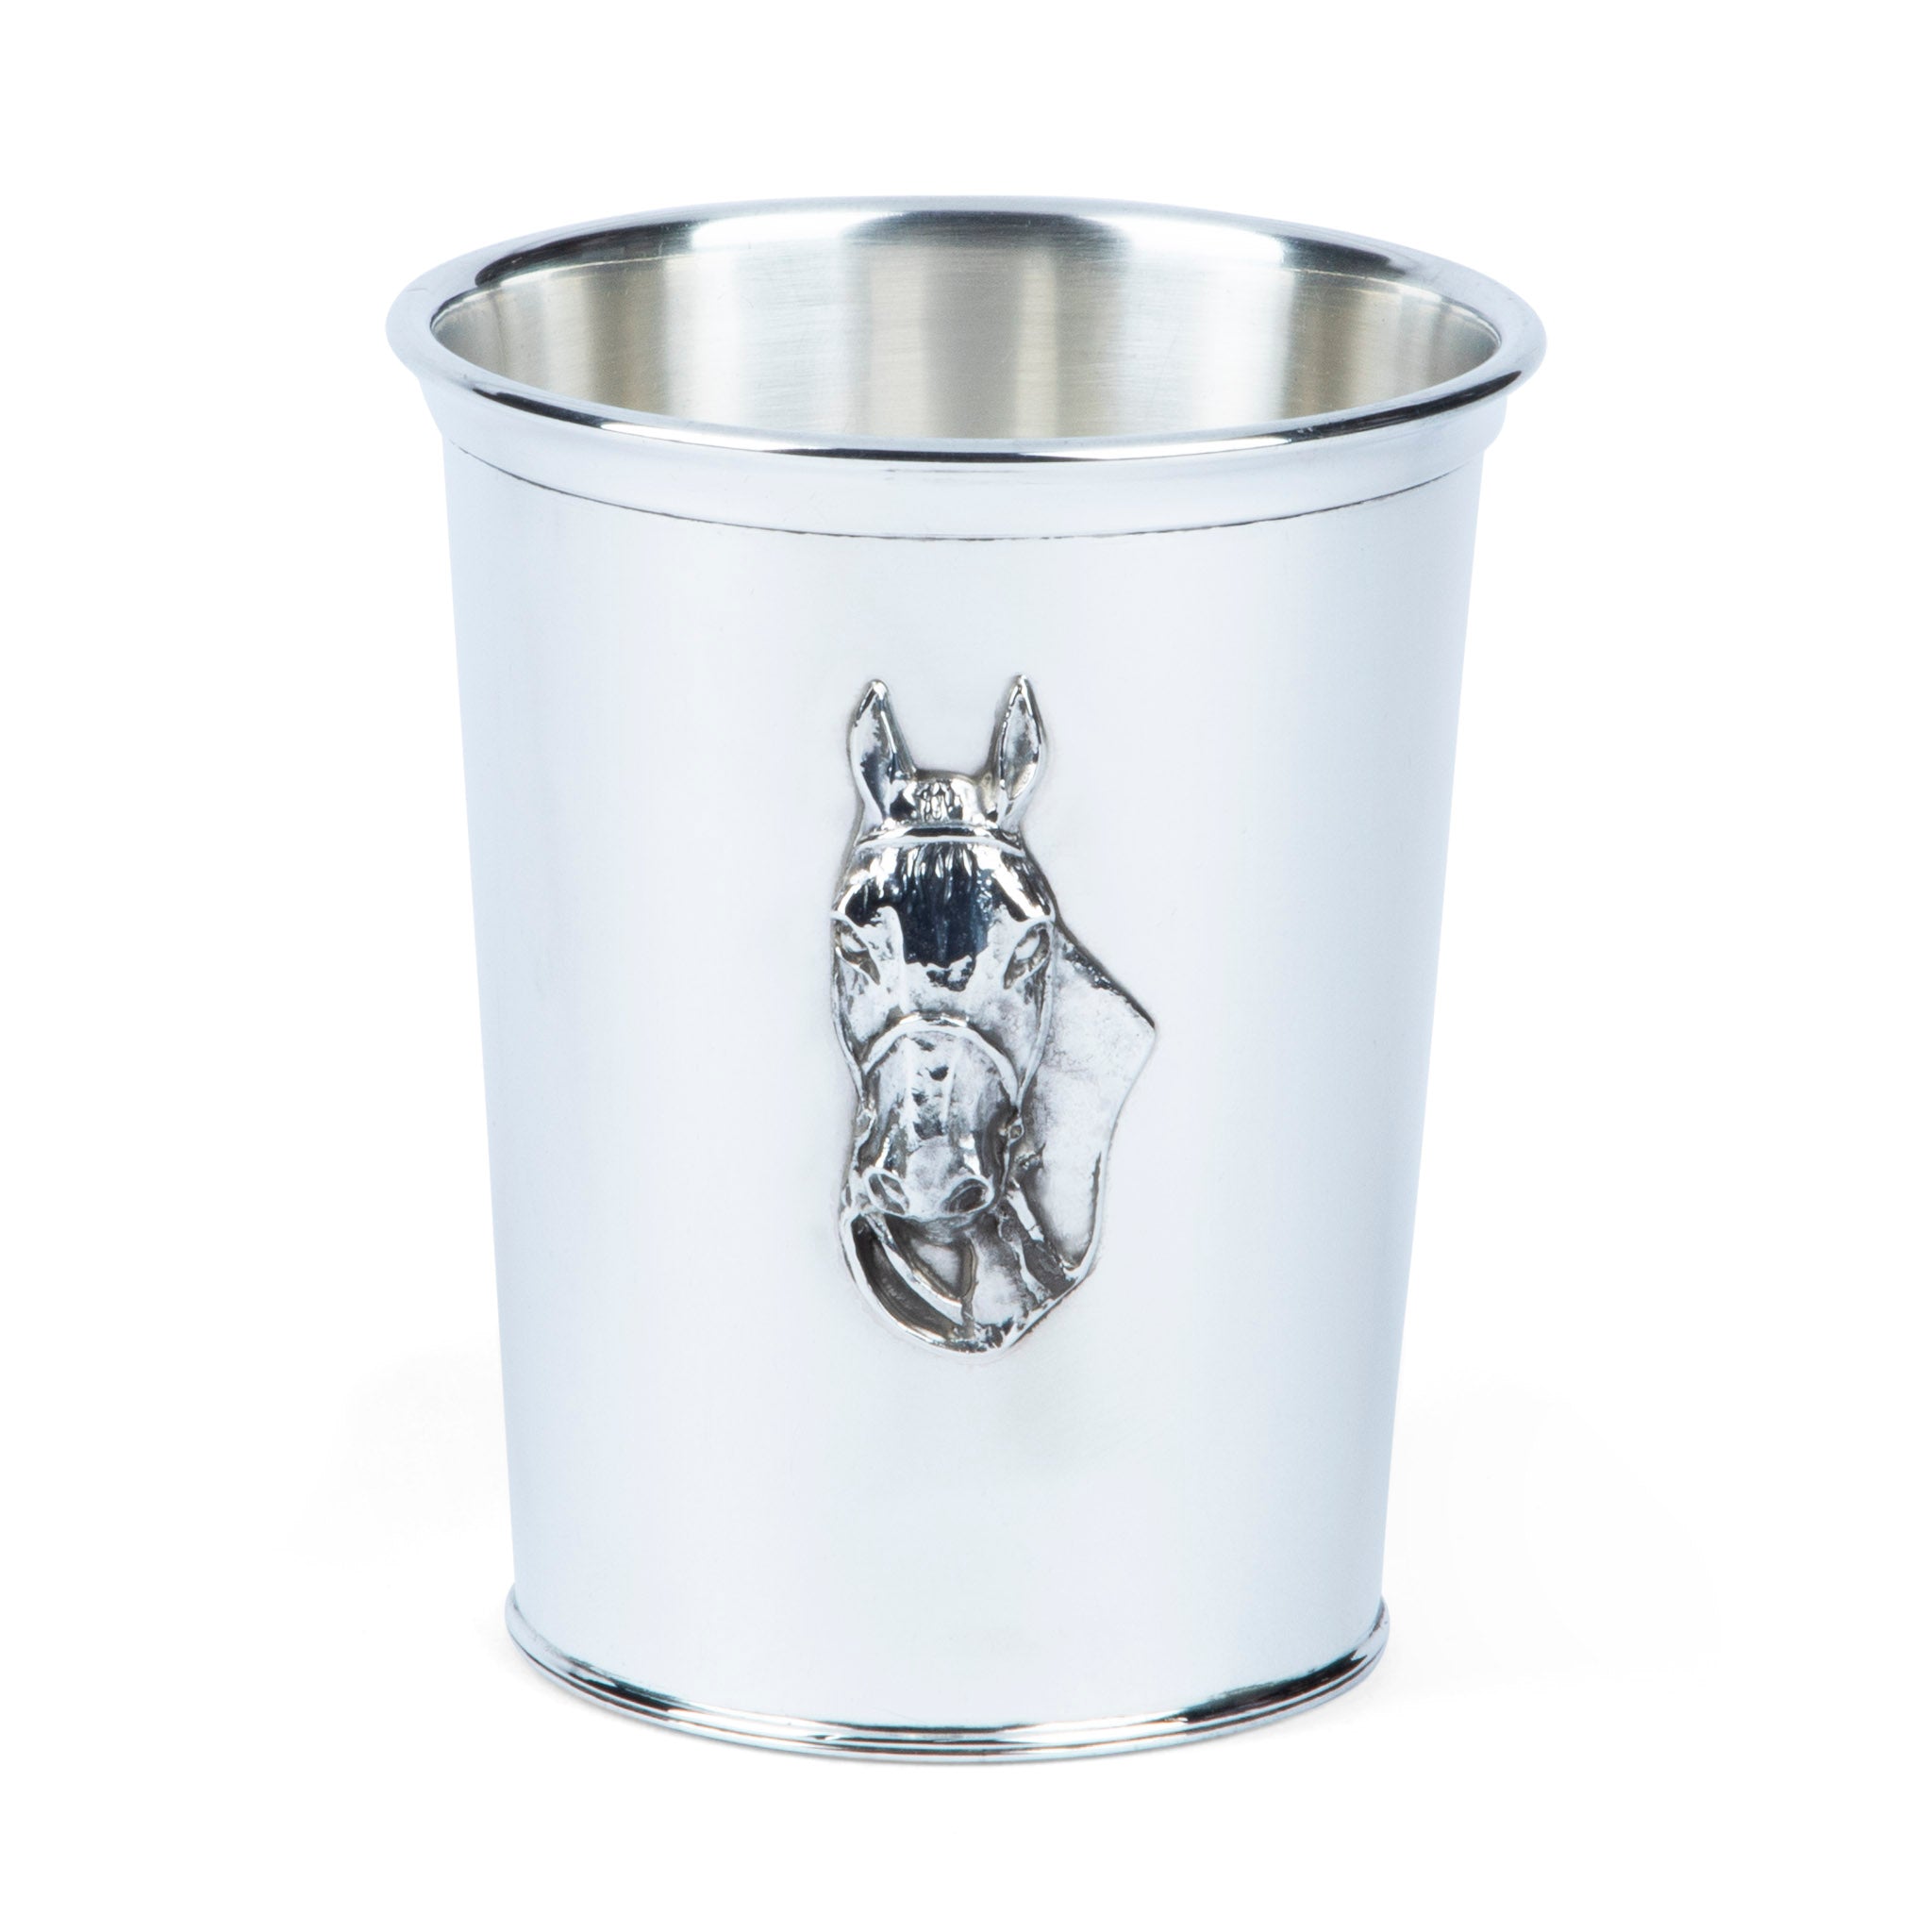 Webster Sterling Silver Horse Head Mint Julep Cup